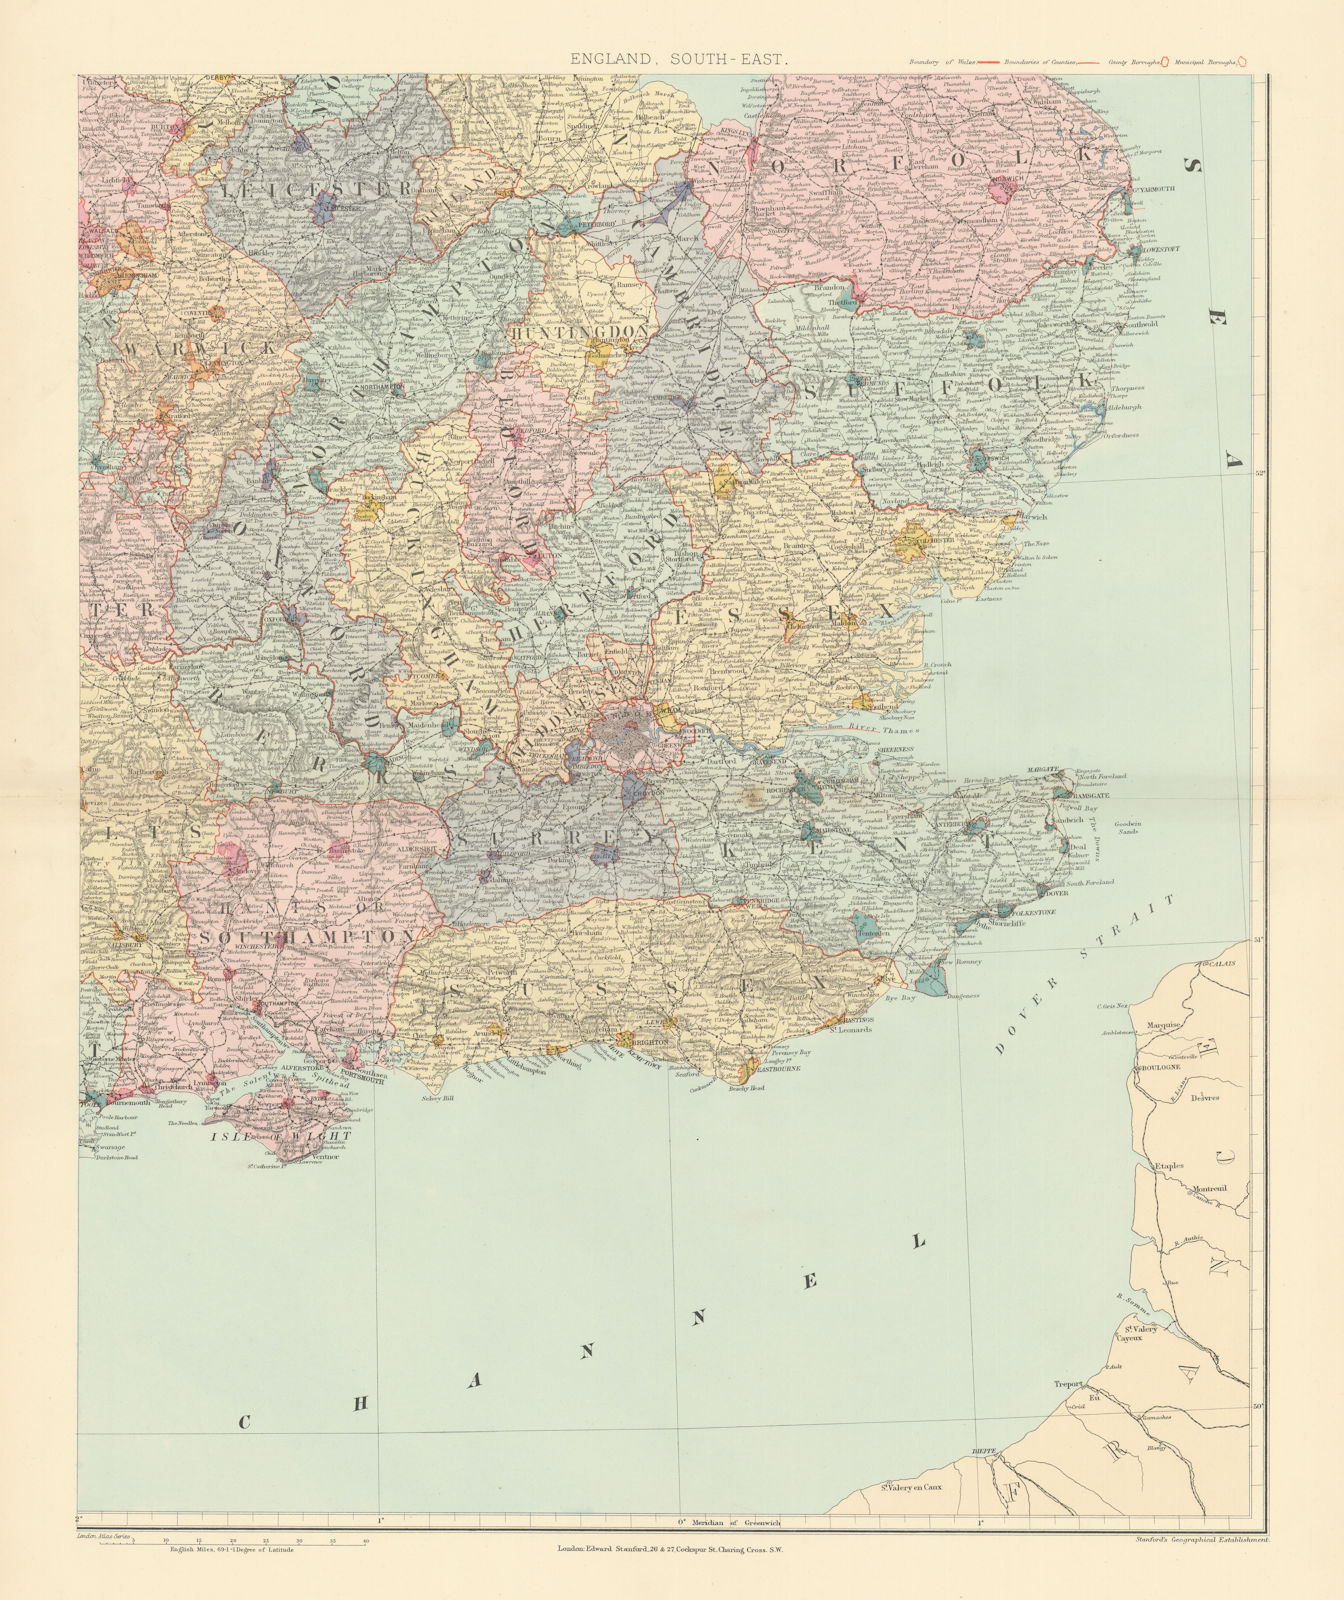 Associate Product South east England. Counties & boroughs. Large 62x50cm. STANFORD 1896 old map